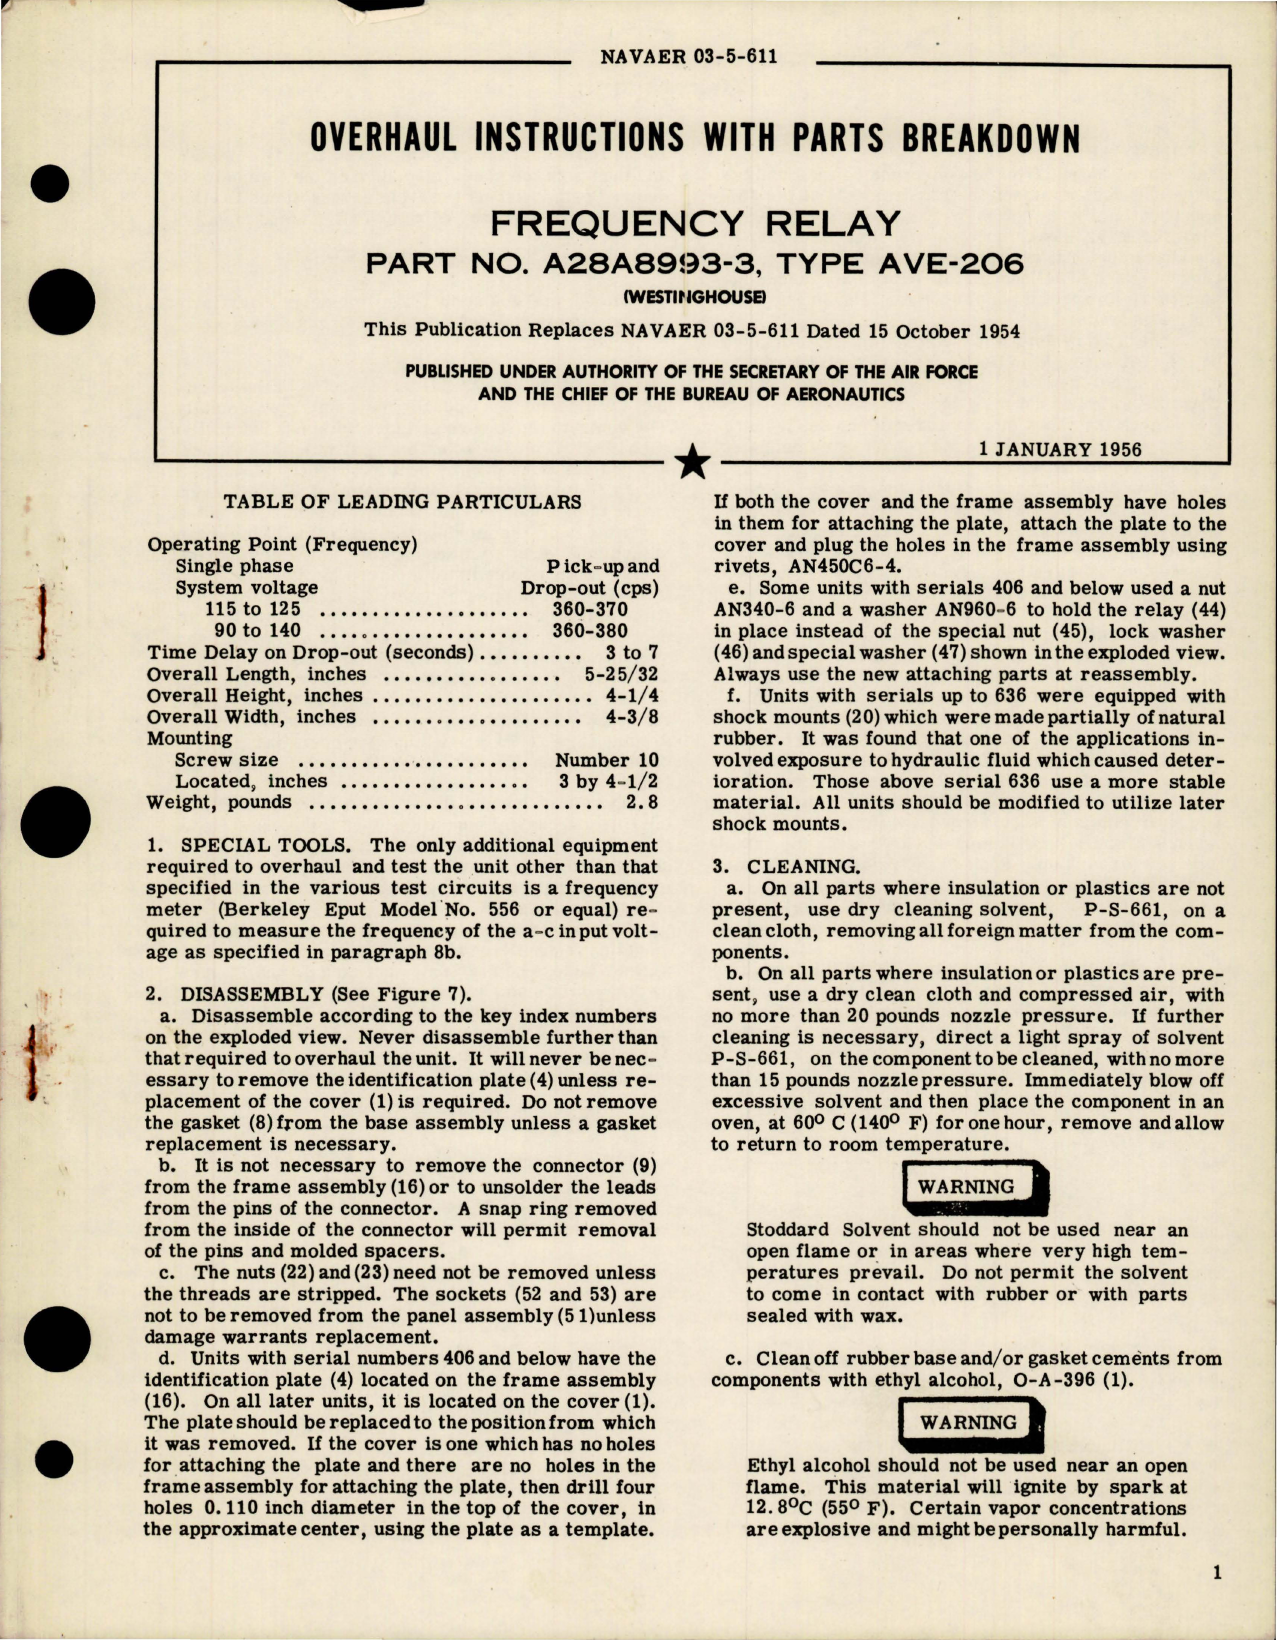 Sample page 1 from AirCorps Library document: Overhaul Instructions with Parts Breakdown for Frequency Relay - Parts A28A8993-3 - Type AVE-206